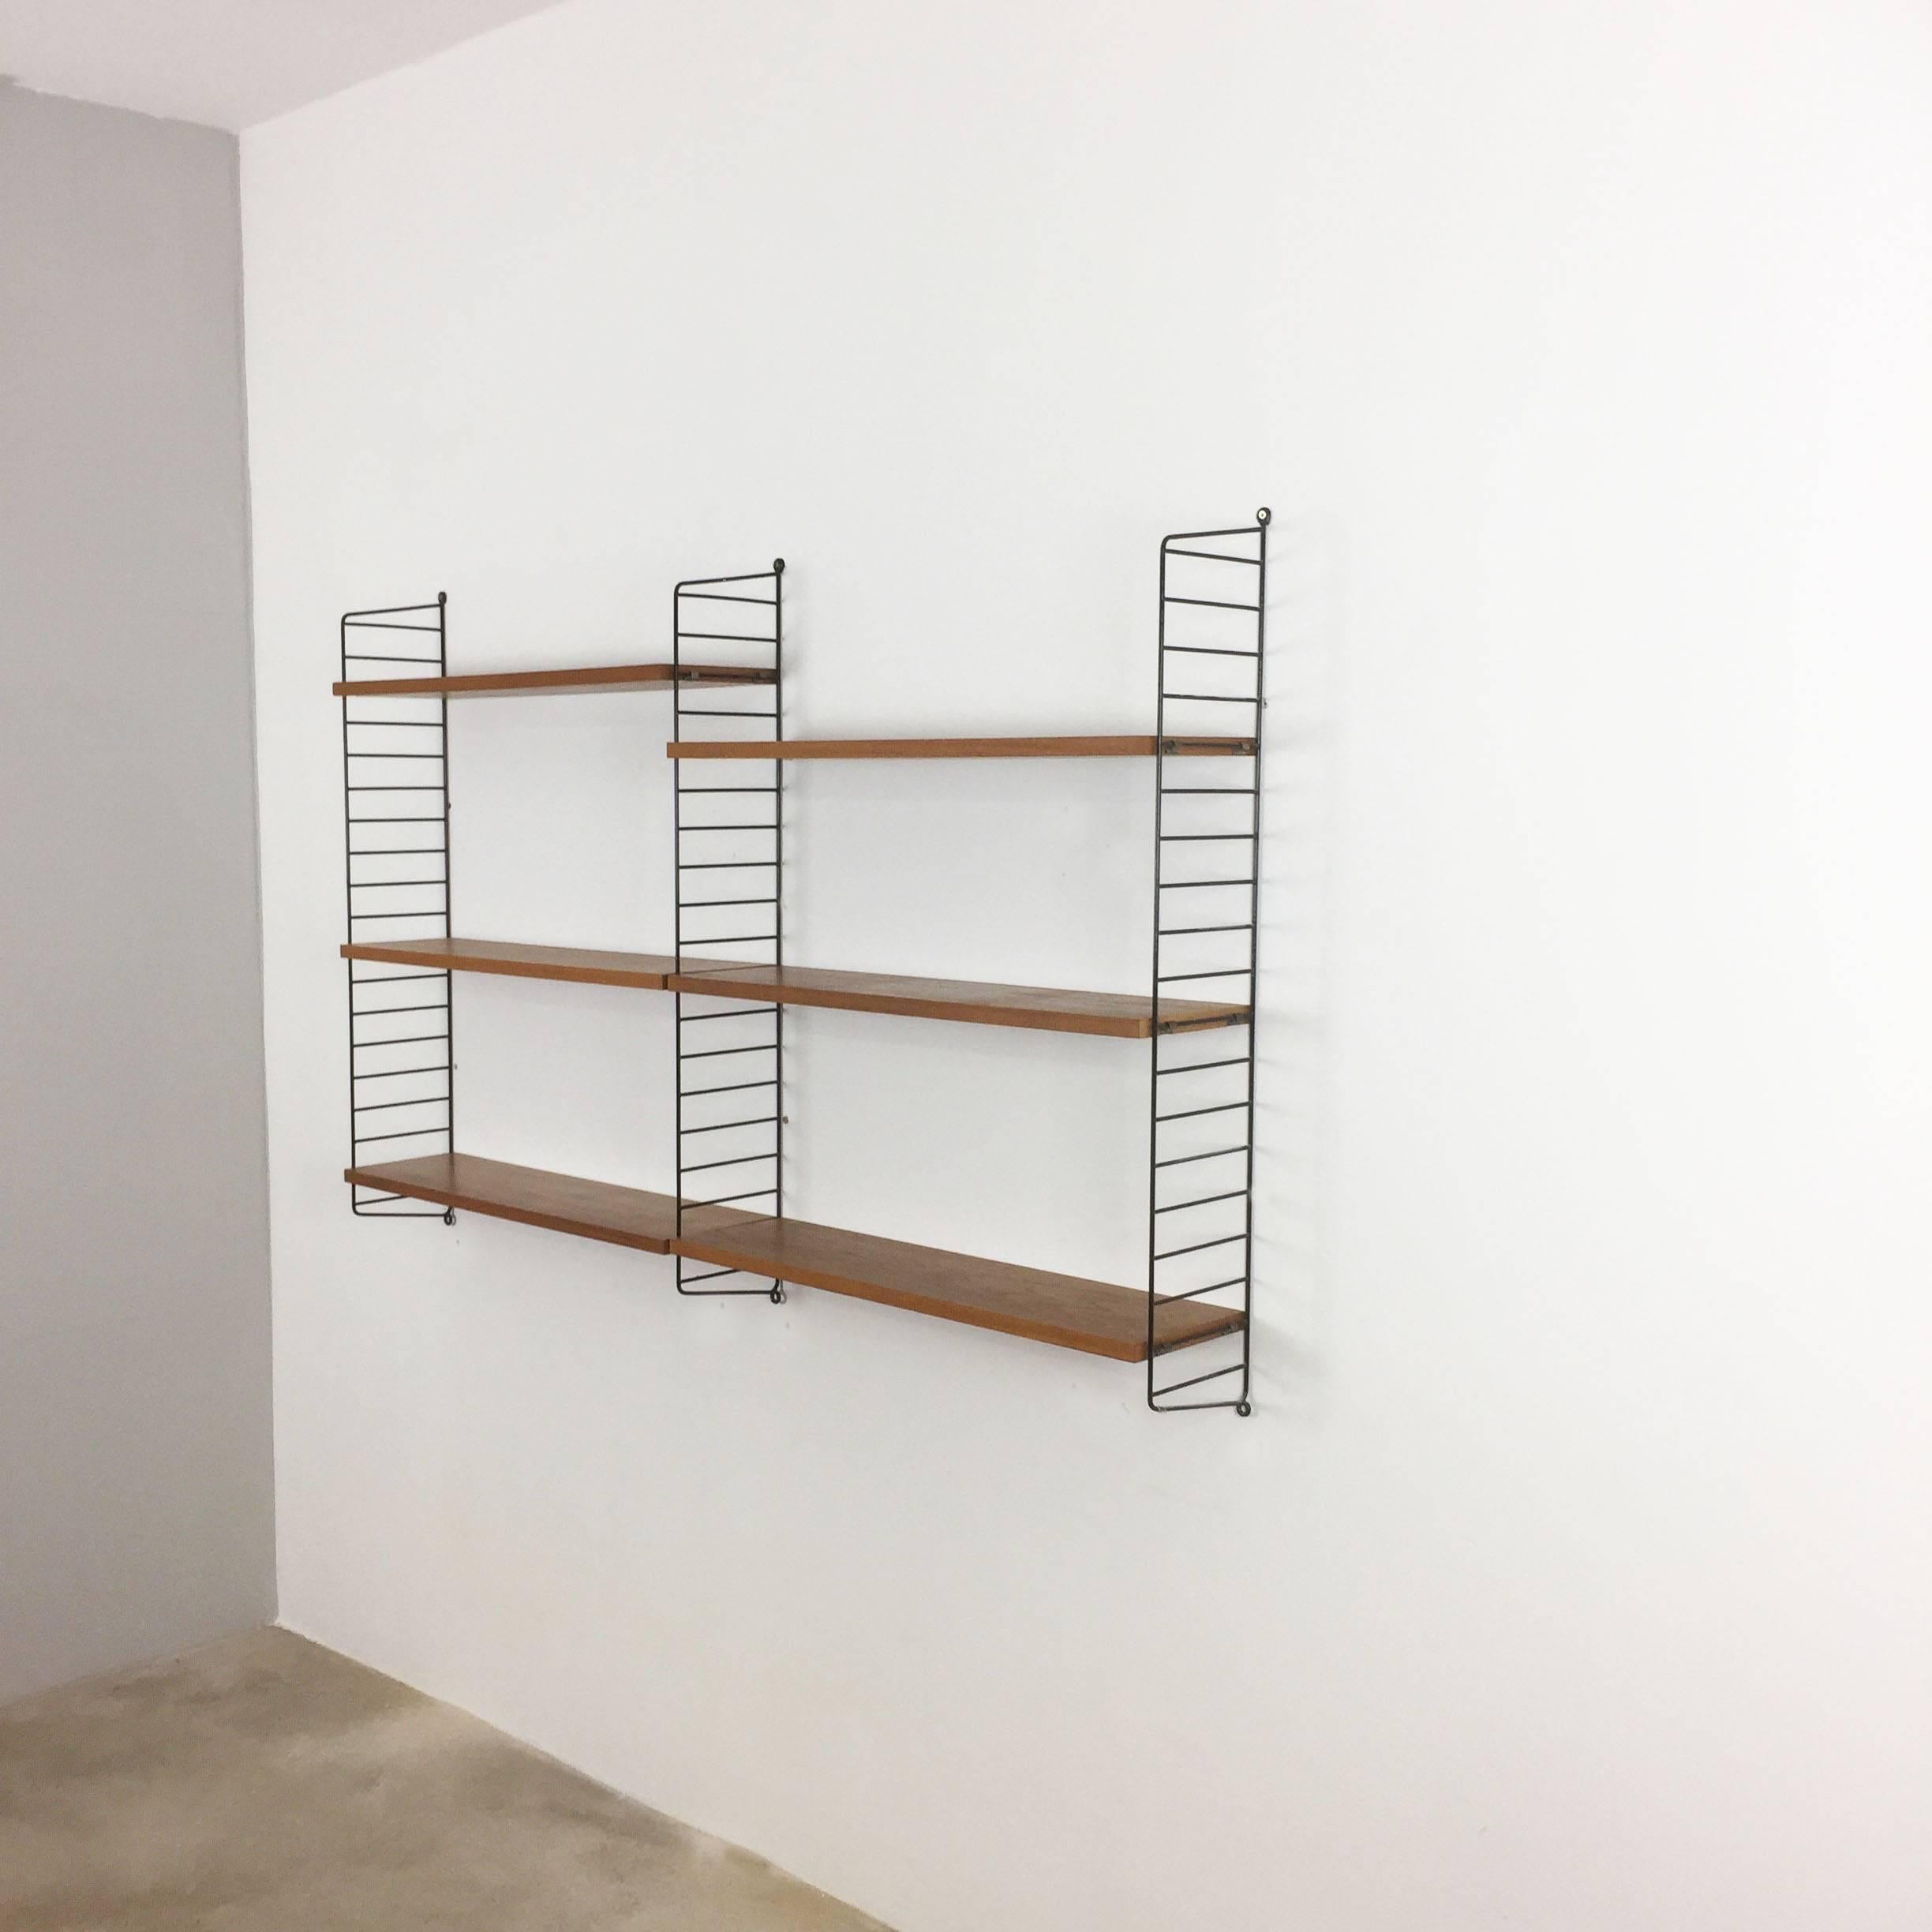 String regal wall unit

Made in Sweden

Bokhyllan ’The Ladder Shelf’

Design: Nils und Kajsa Strinning, 1949

The architect Nisse Strinning was born in 1917. From 1940-1947 he studied architecture in Stockholm, before he designed the